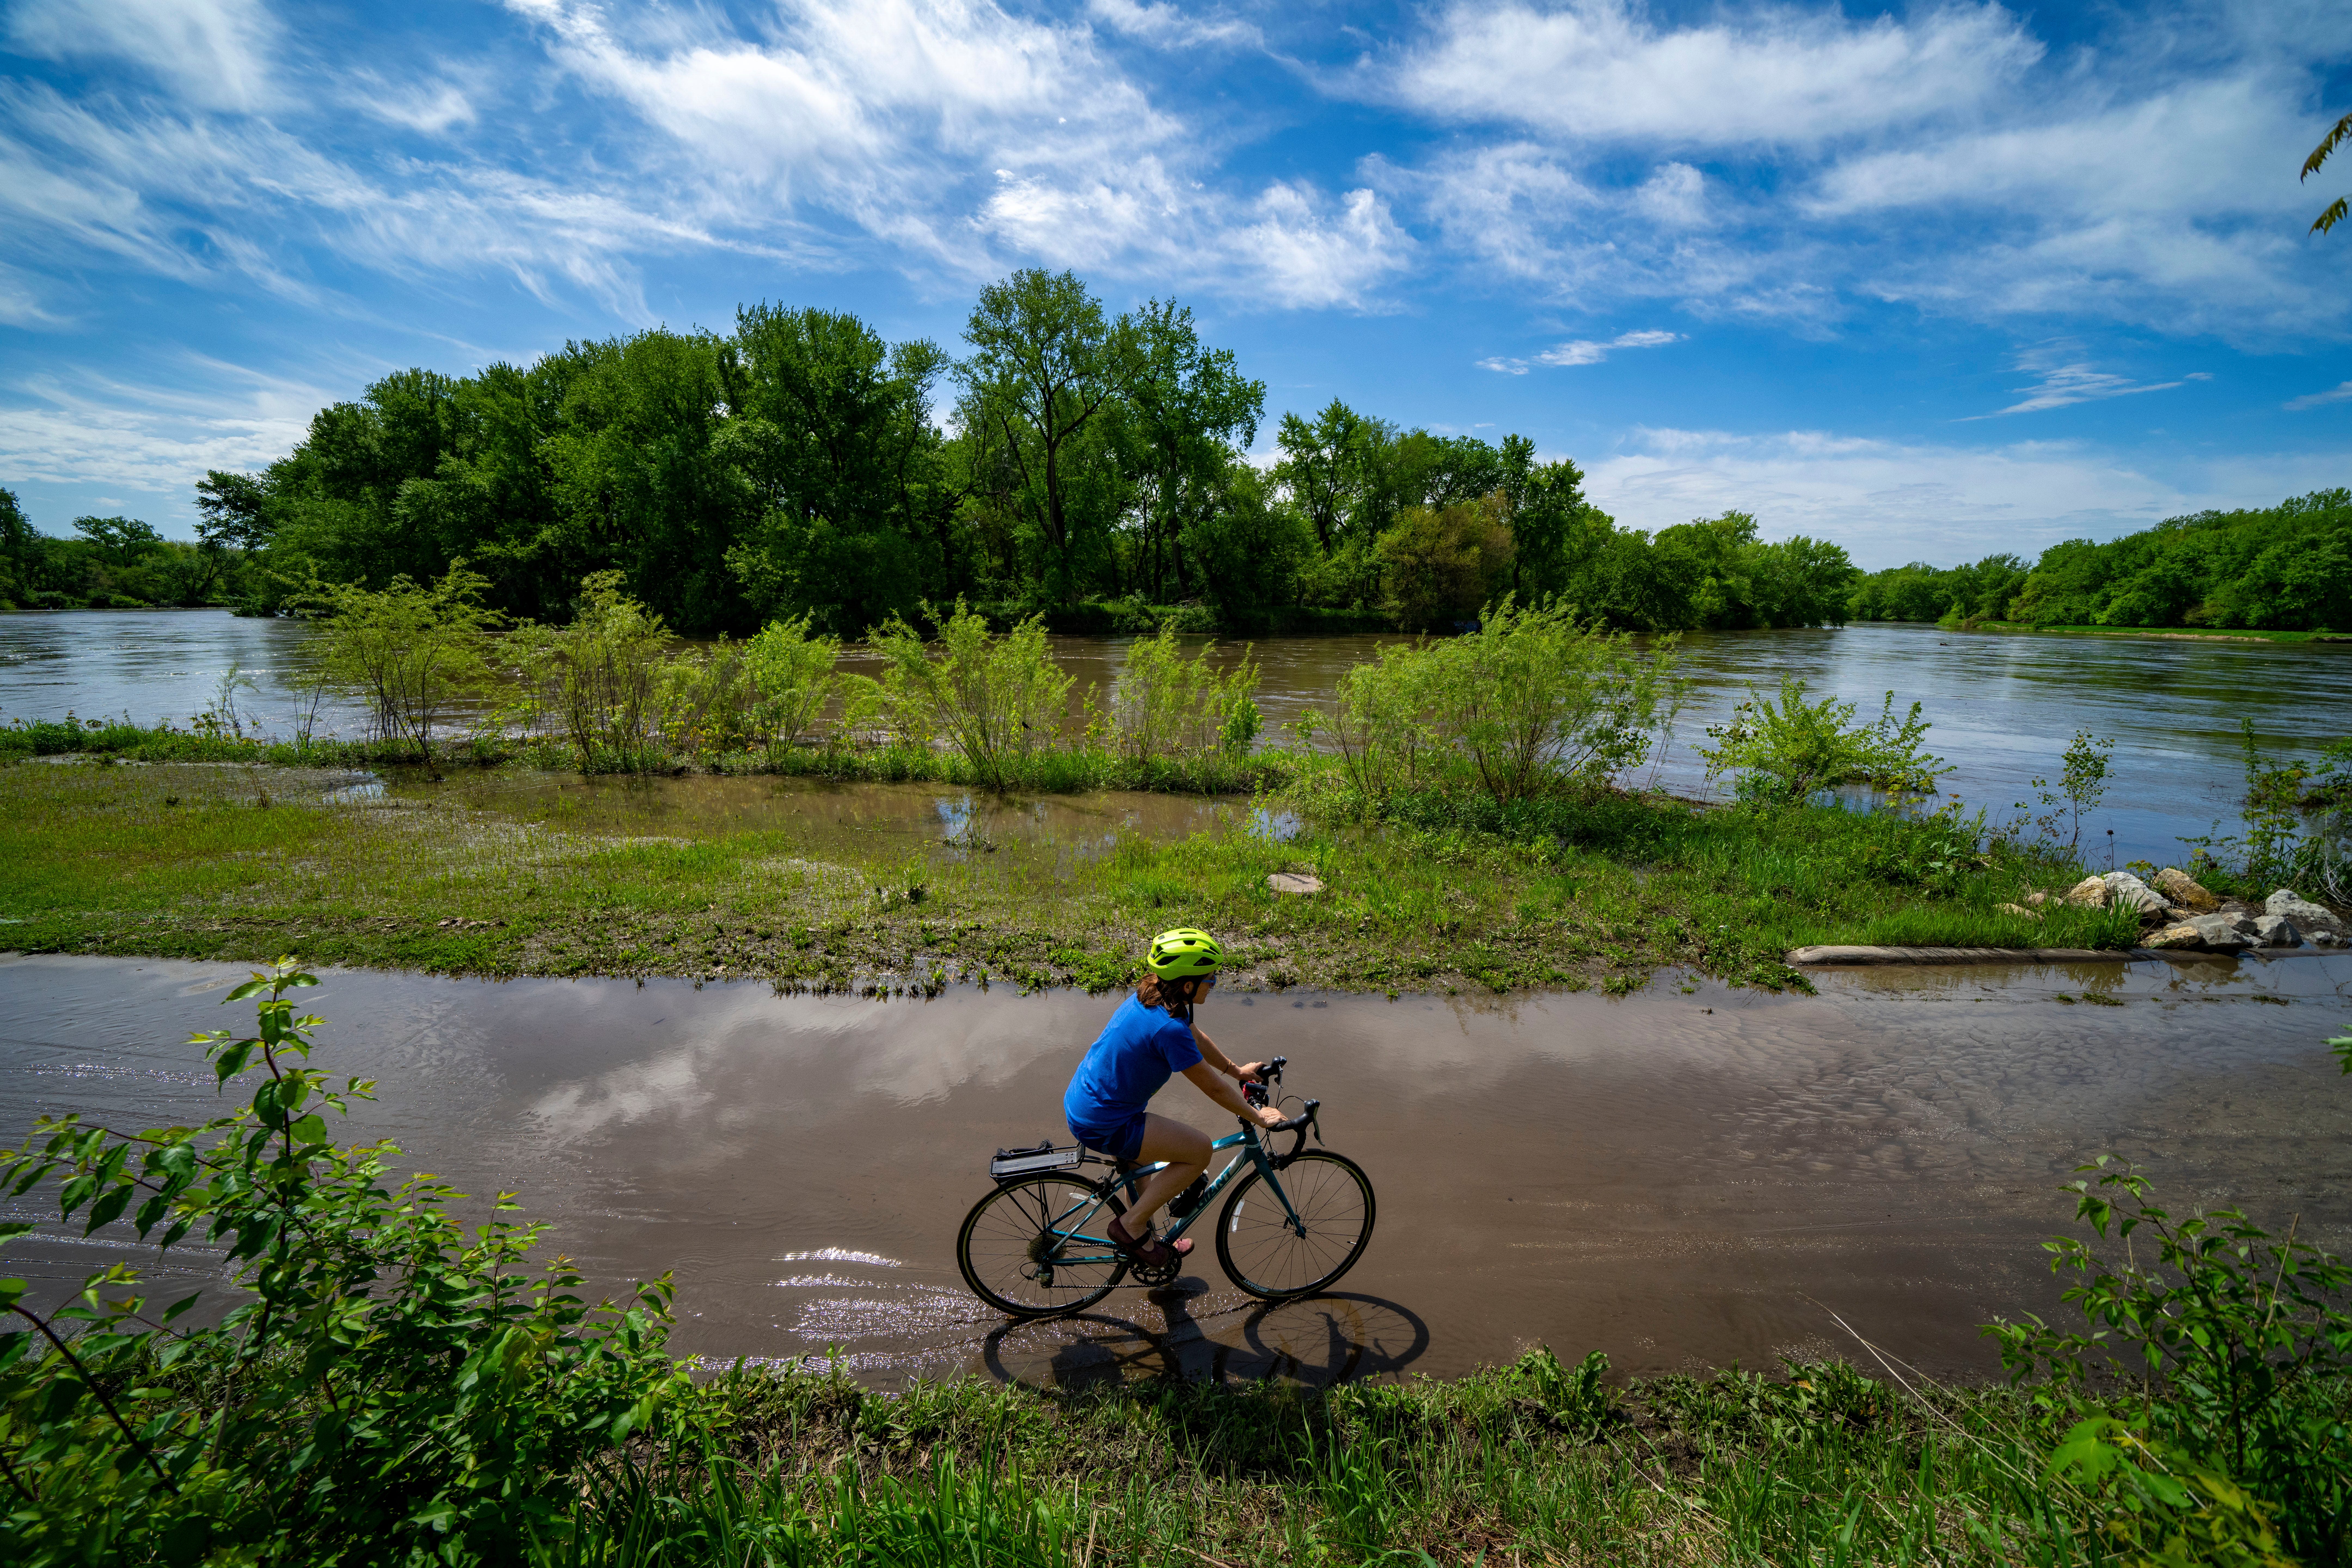 Rainfall runoff after long drought leaves many Iowa rivers brimming with nitrate